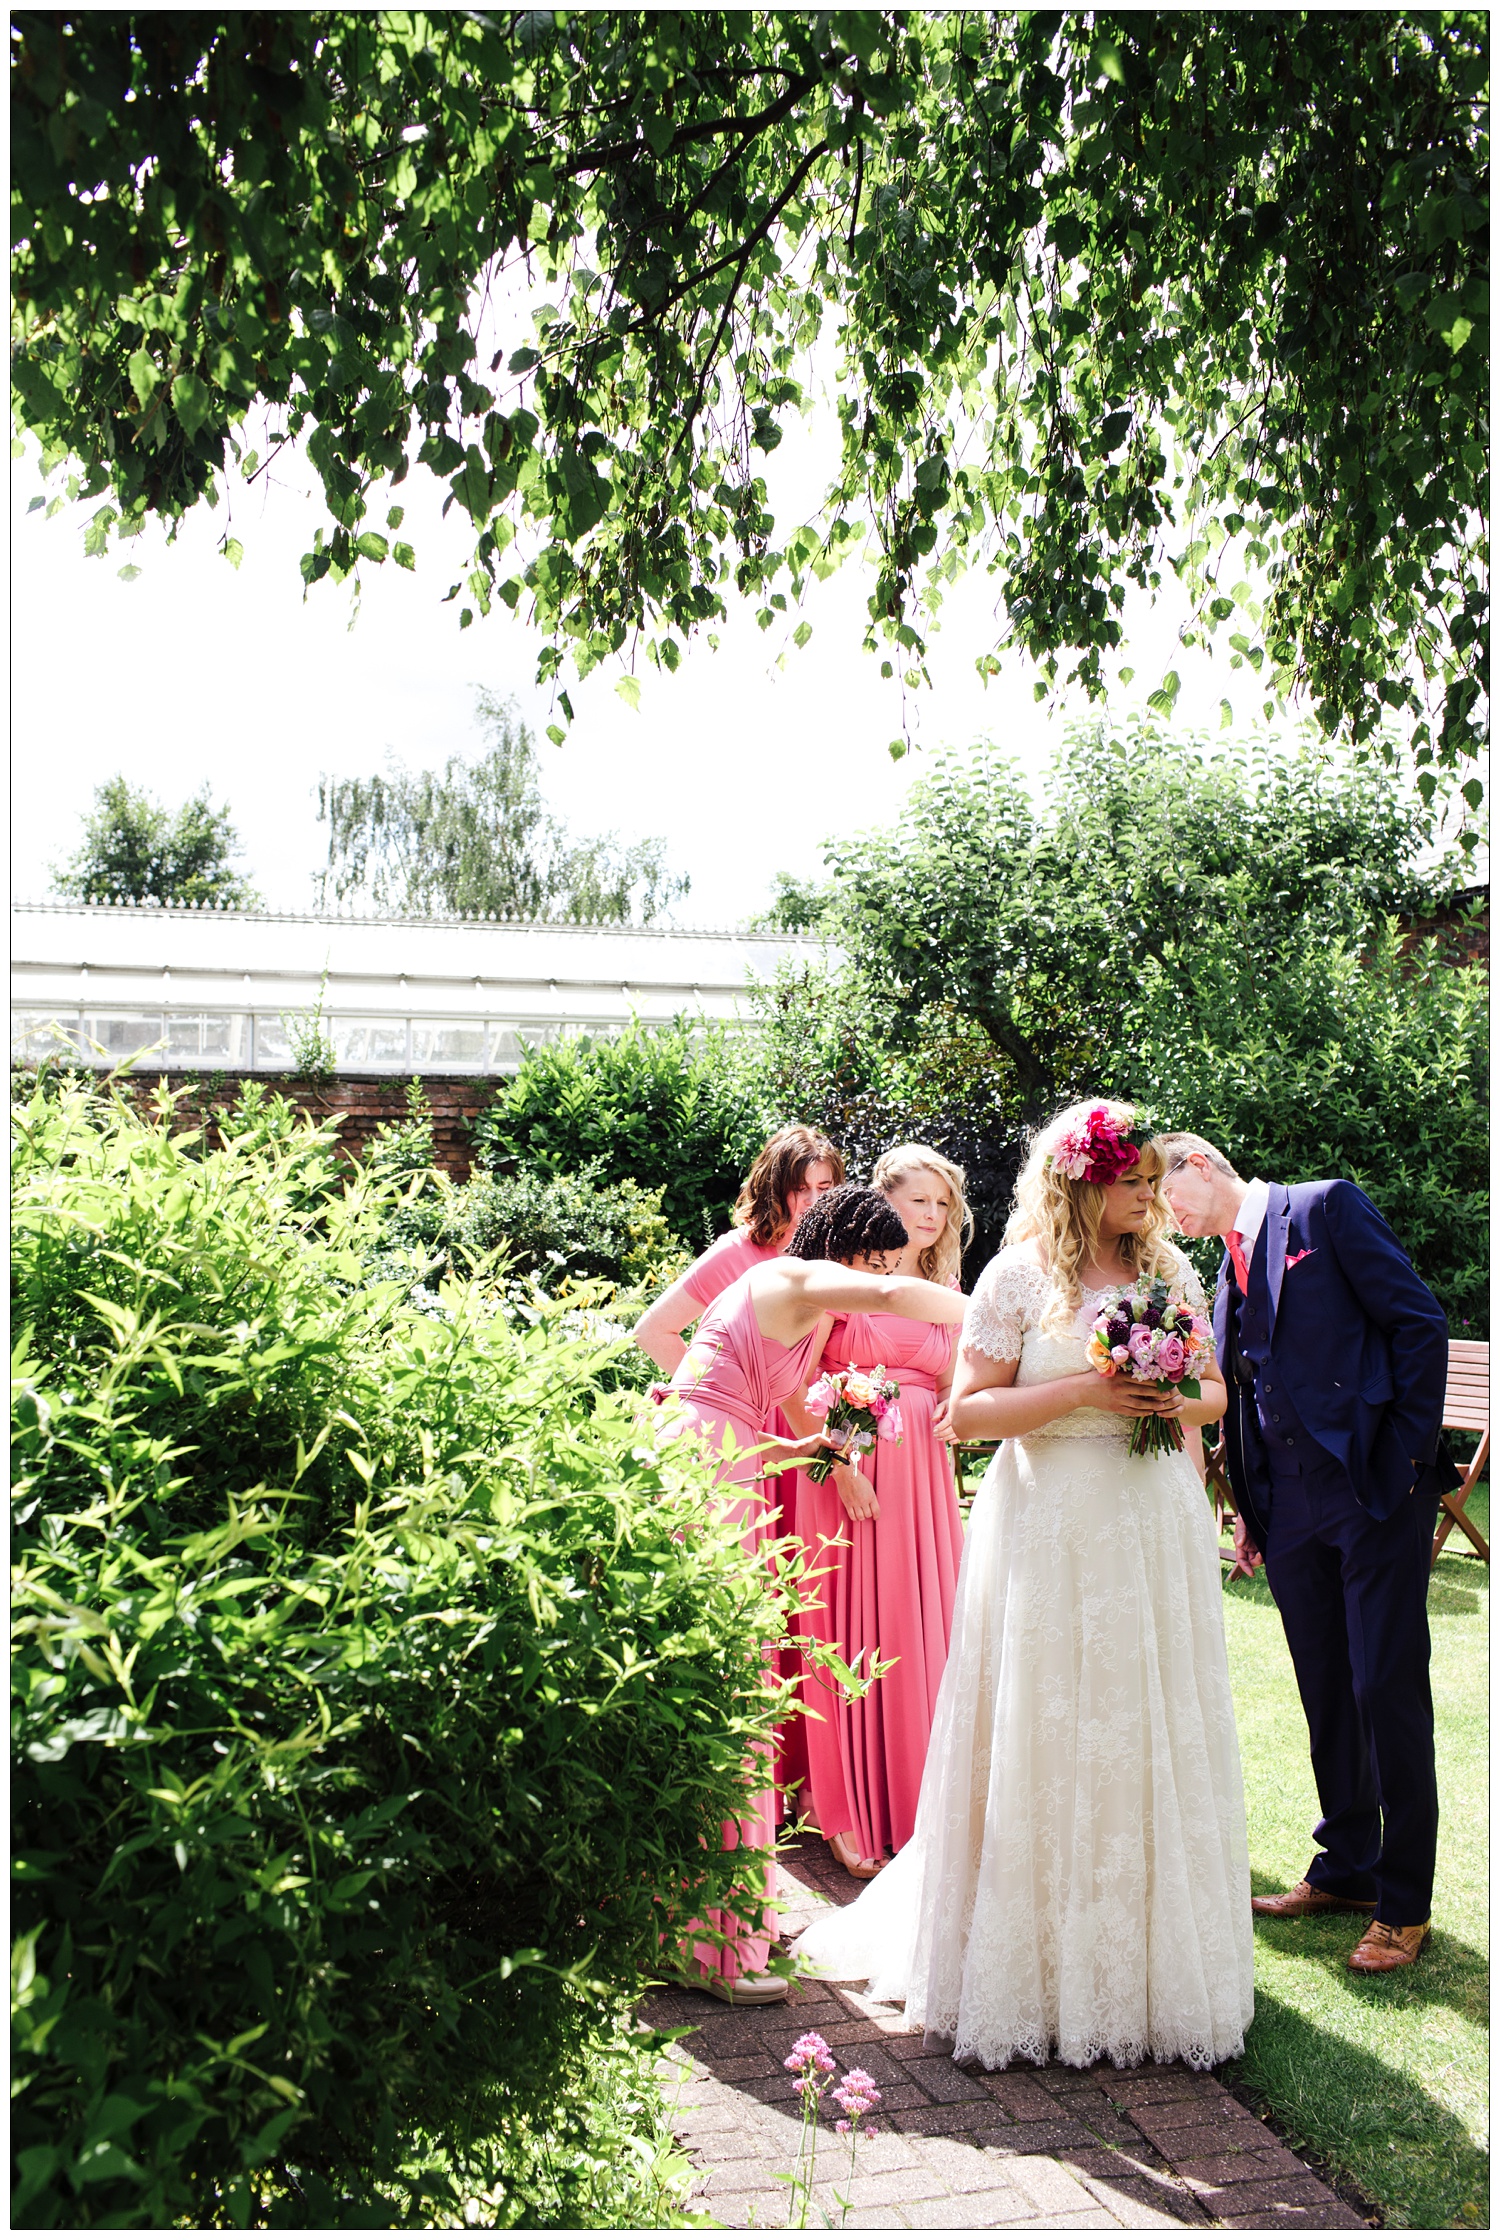 Bride in a garden with her bridesmaids and dad.